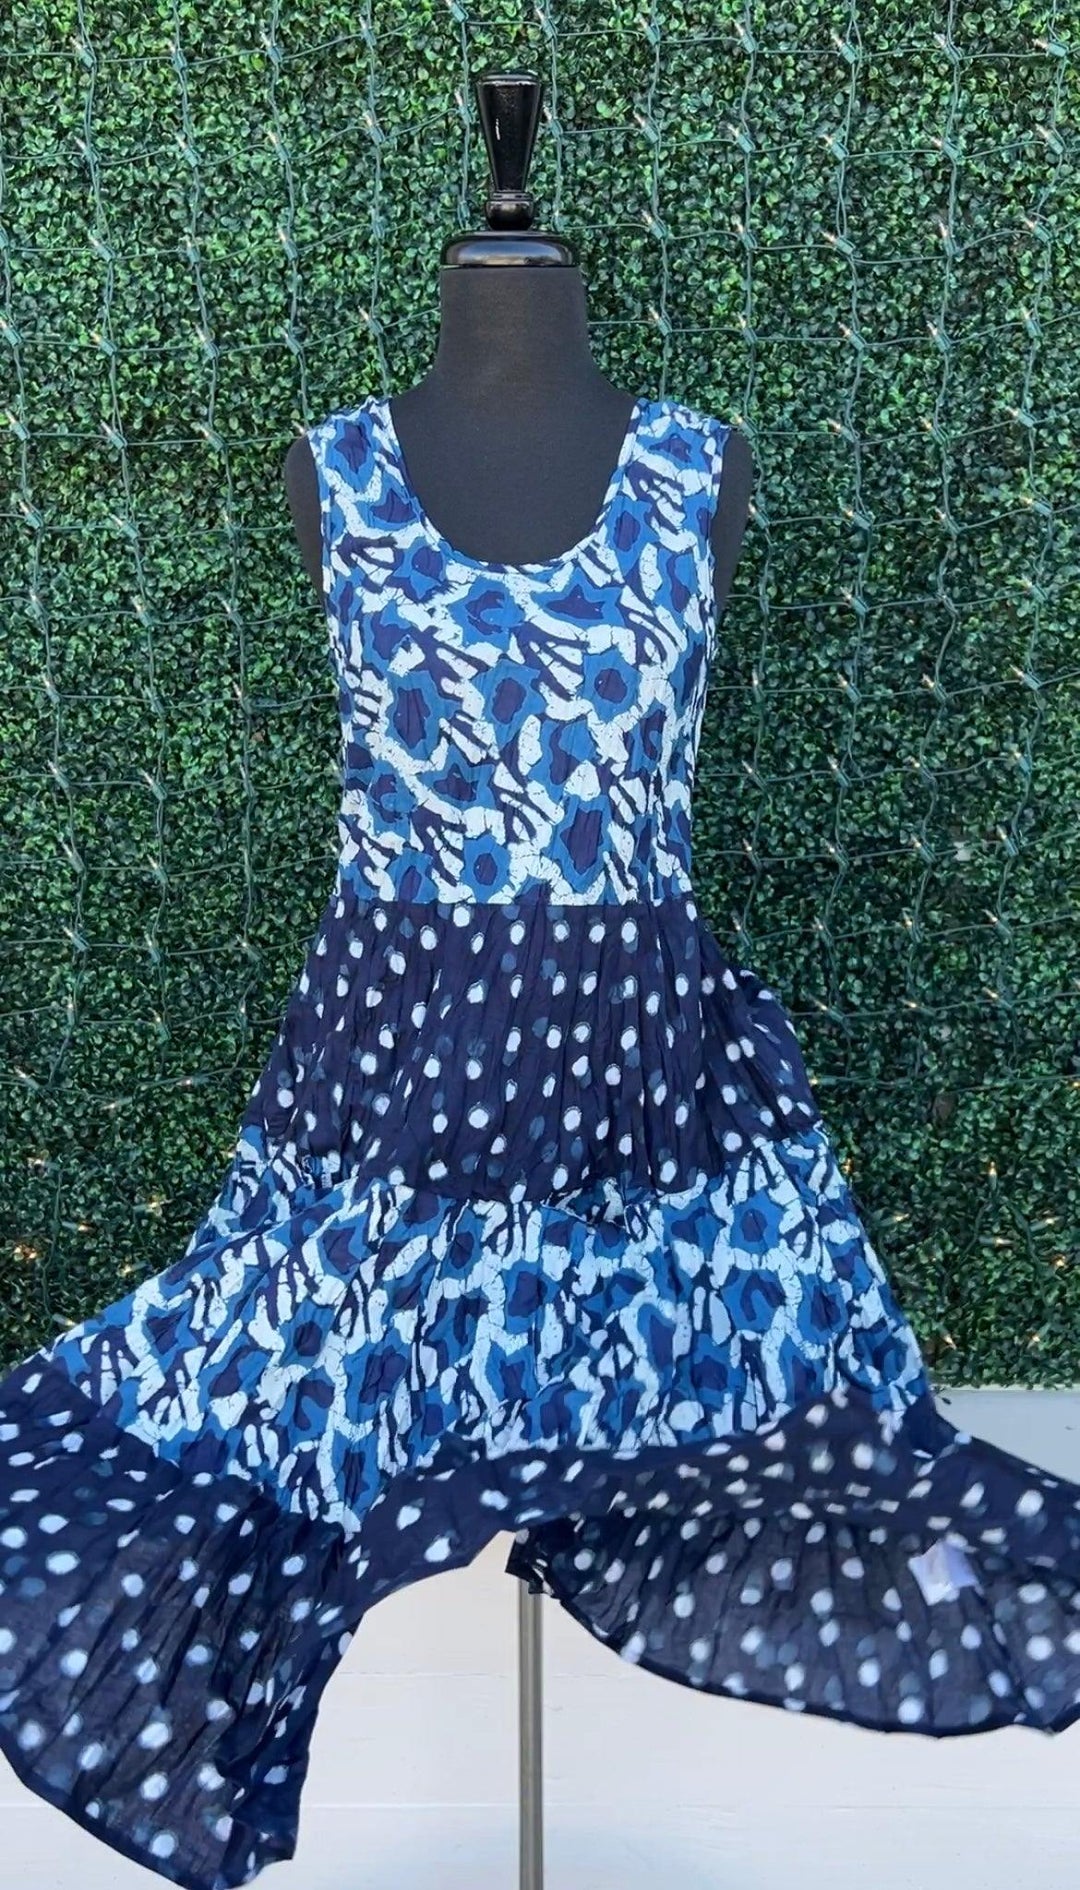 blue and white cotton spring summer dresses tres chic online boutique houston texas